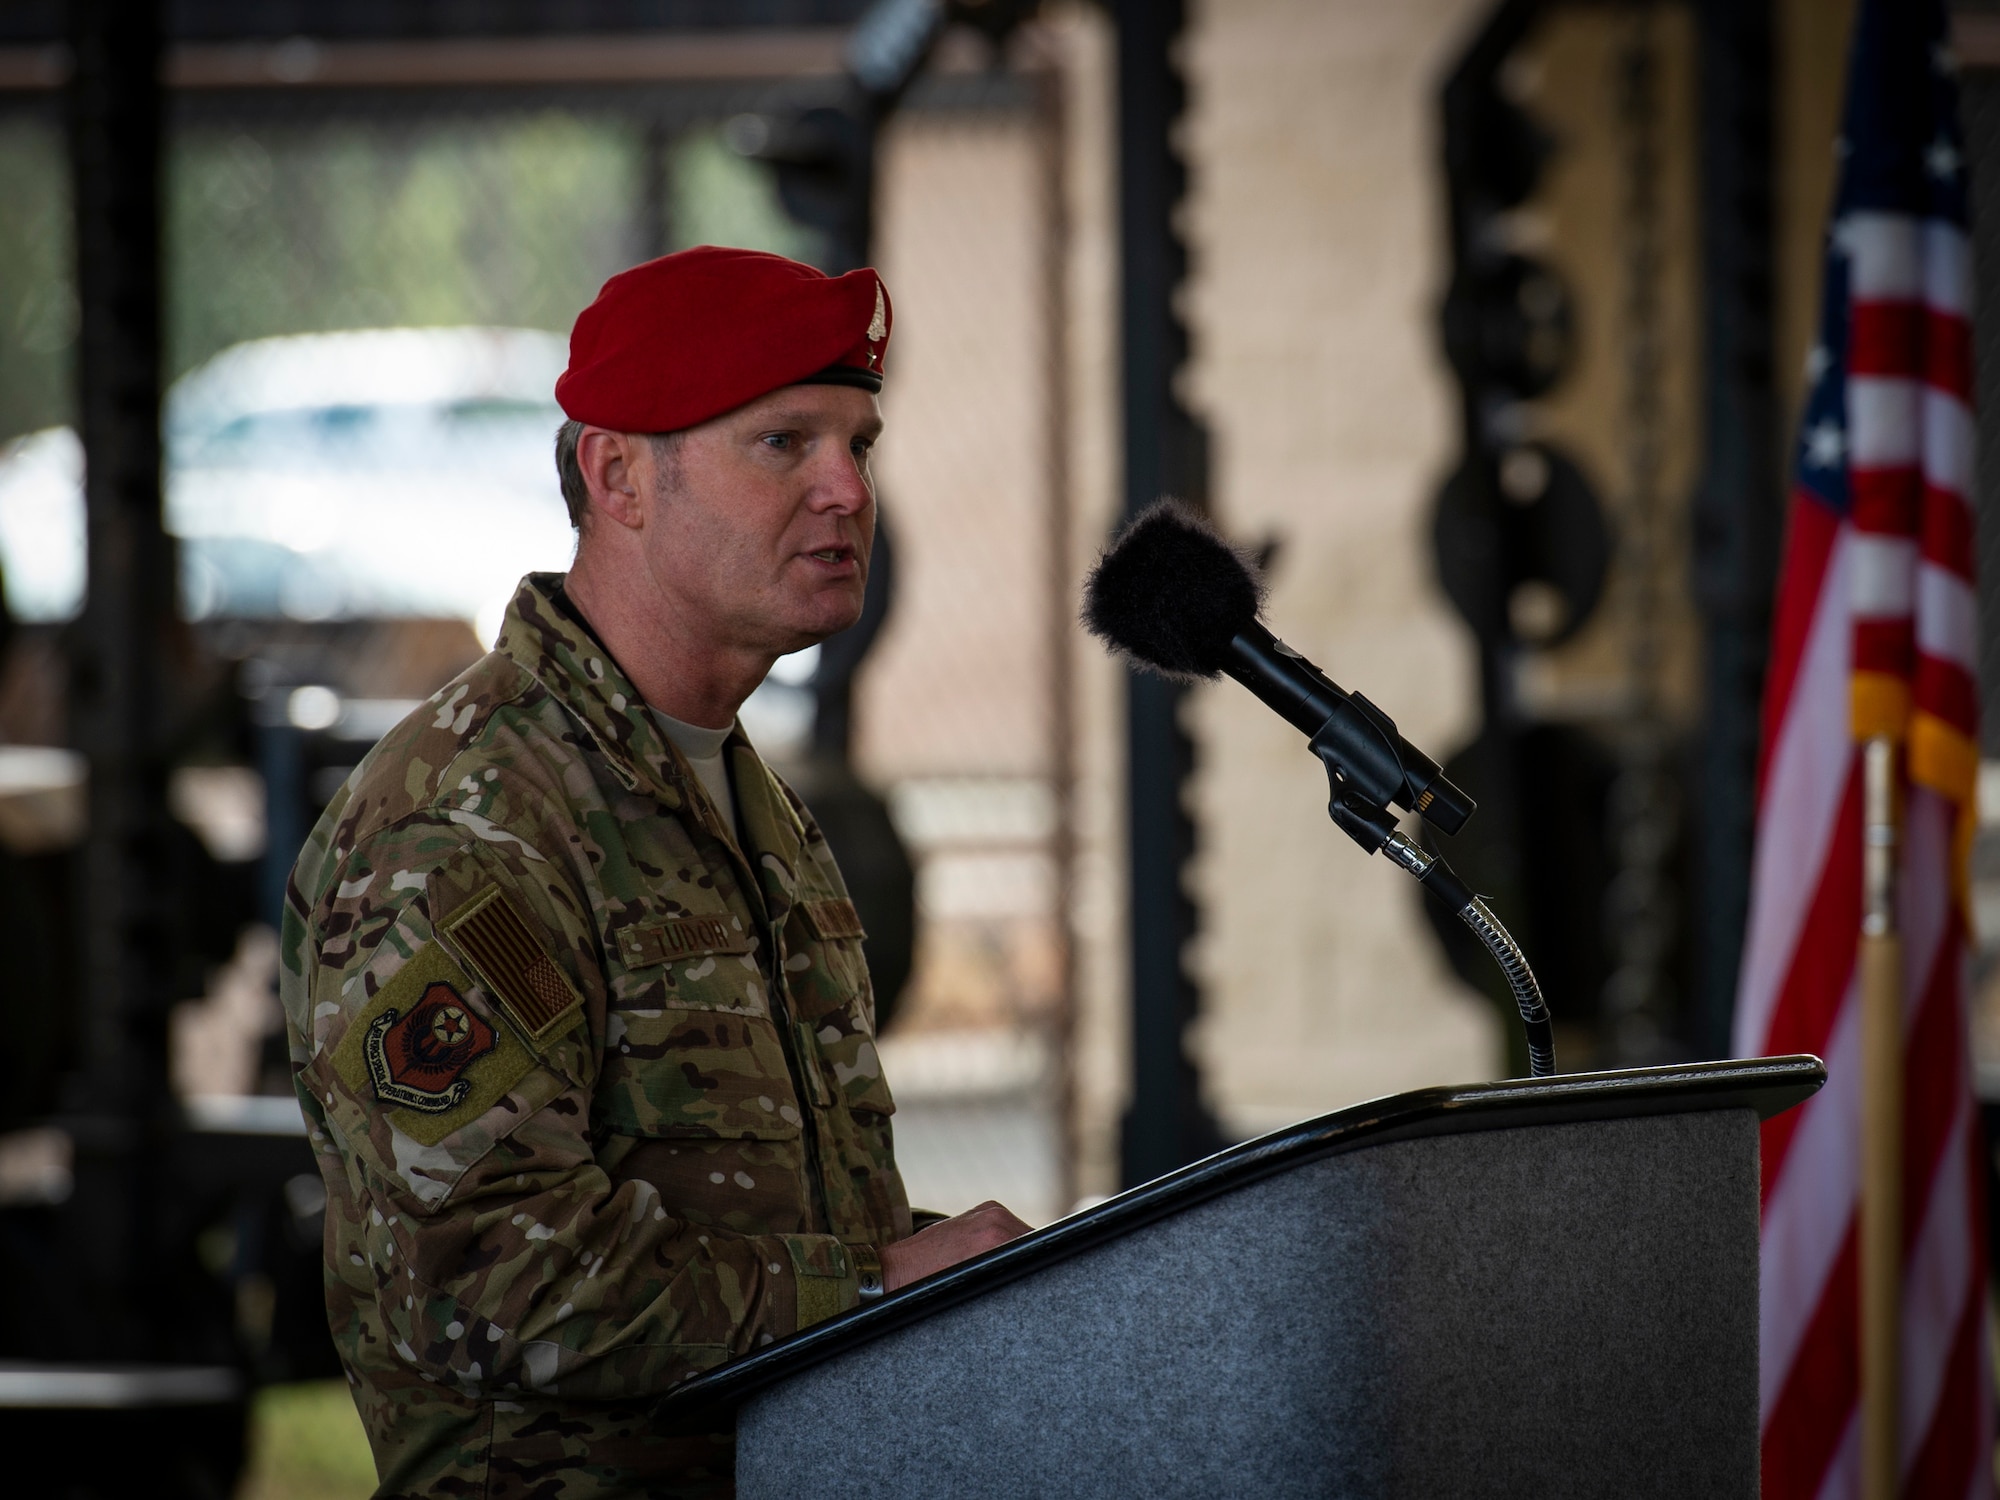 U.S. Air Force Brig. Gen. Claude K. Tudor, Jr., commander of the 24th Special Operations Wing, gives remarks during the Special Tactics Ruck March Memorial Ceremony at Hurlburt Field, Florida, March 4, 2018.